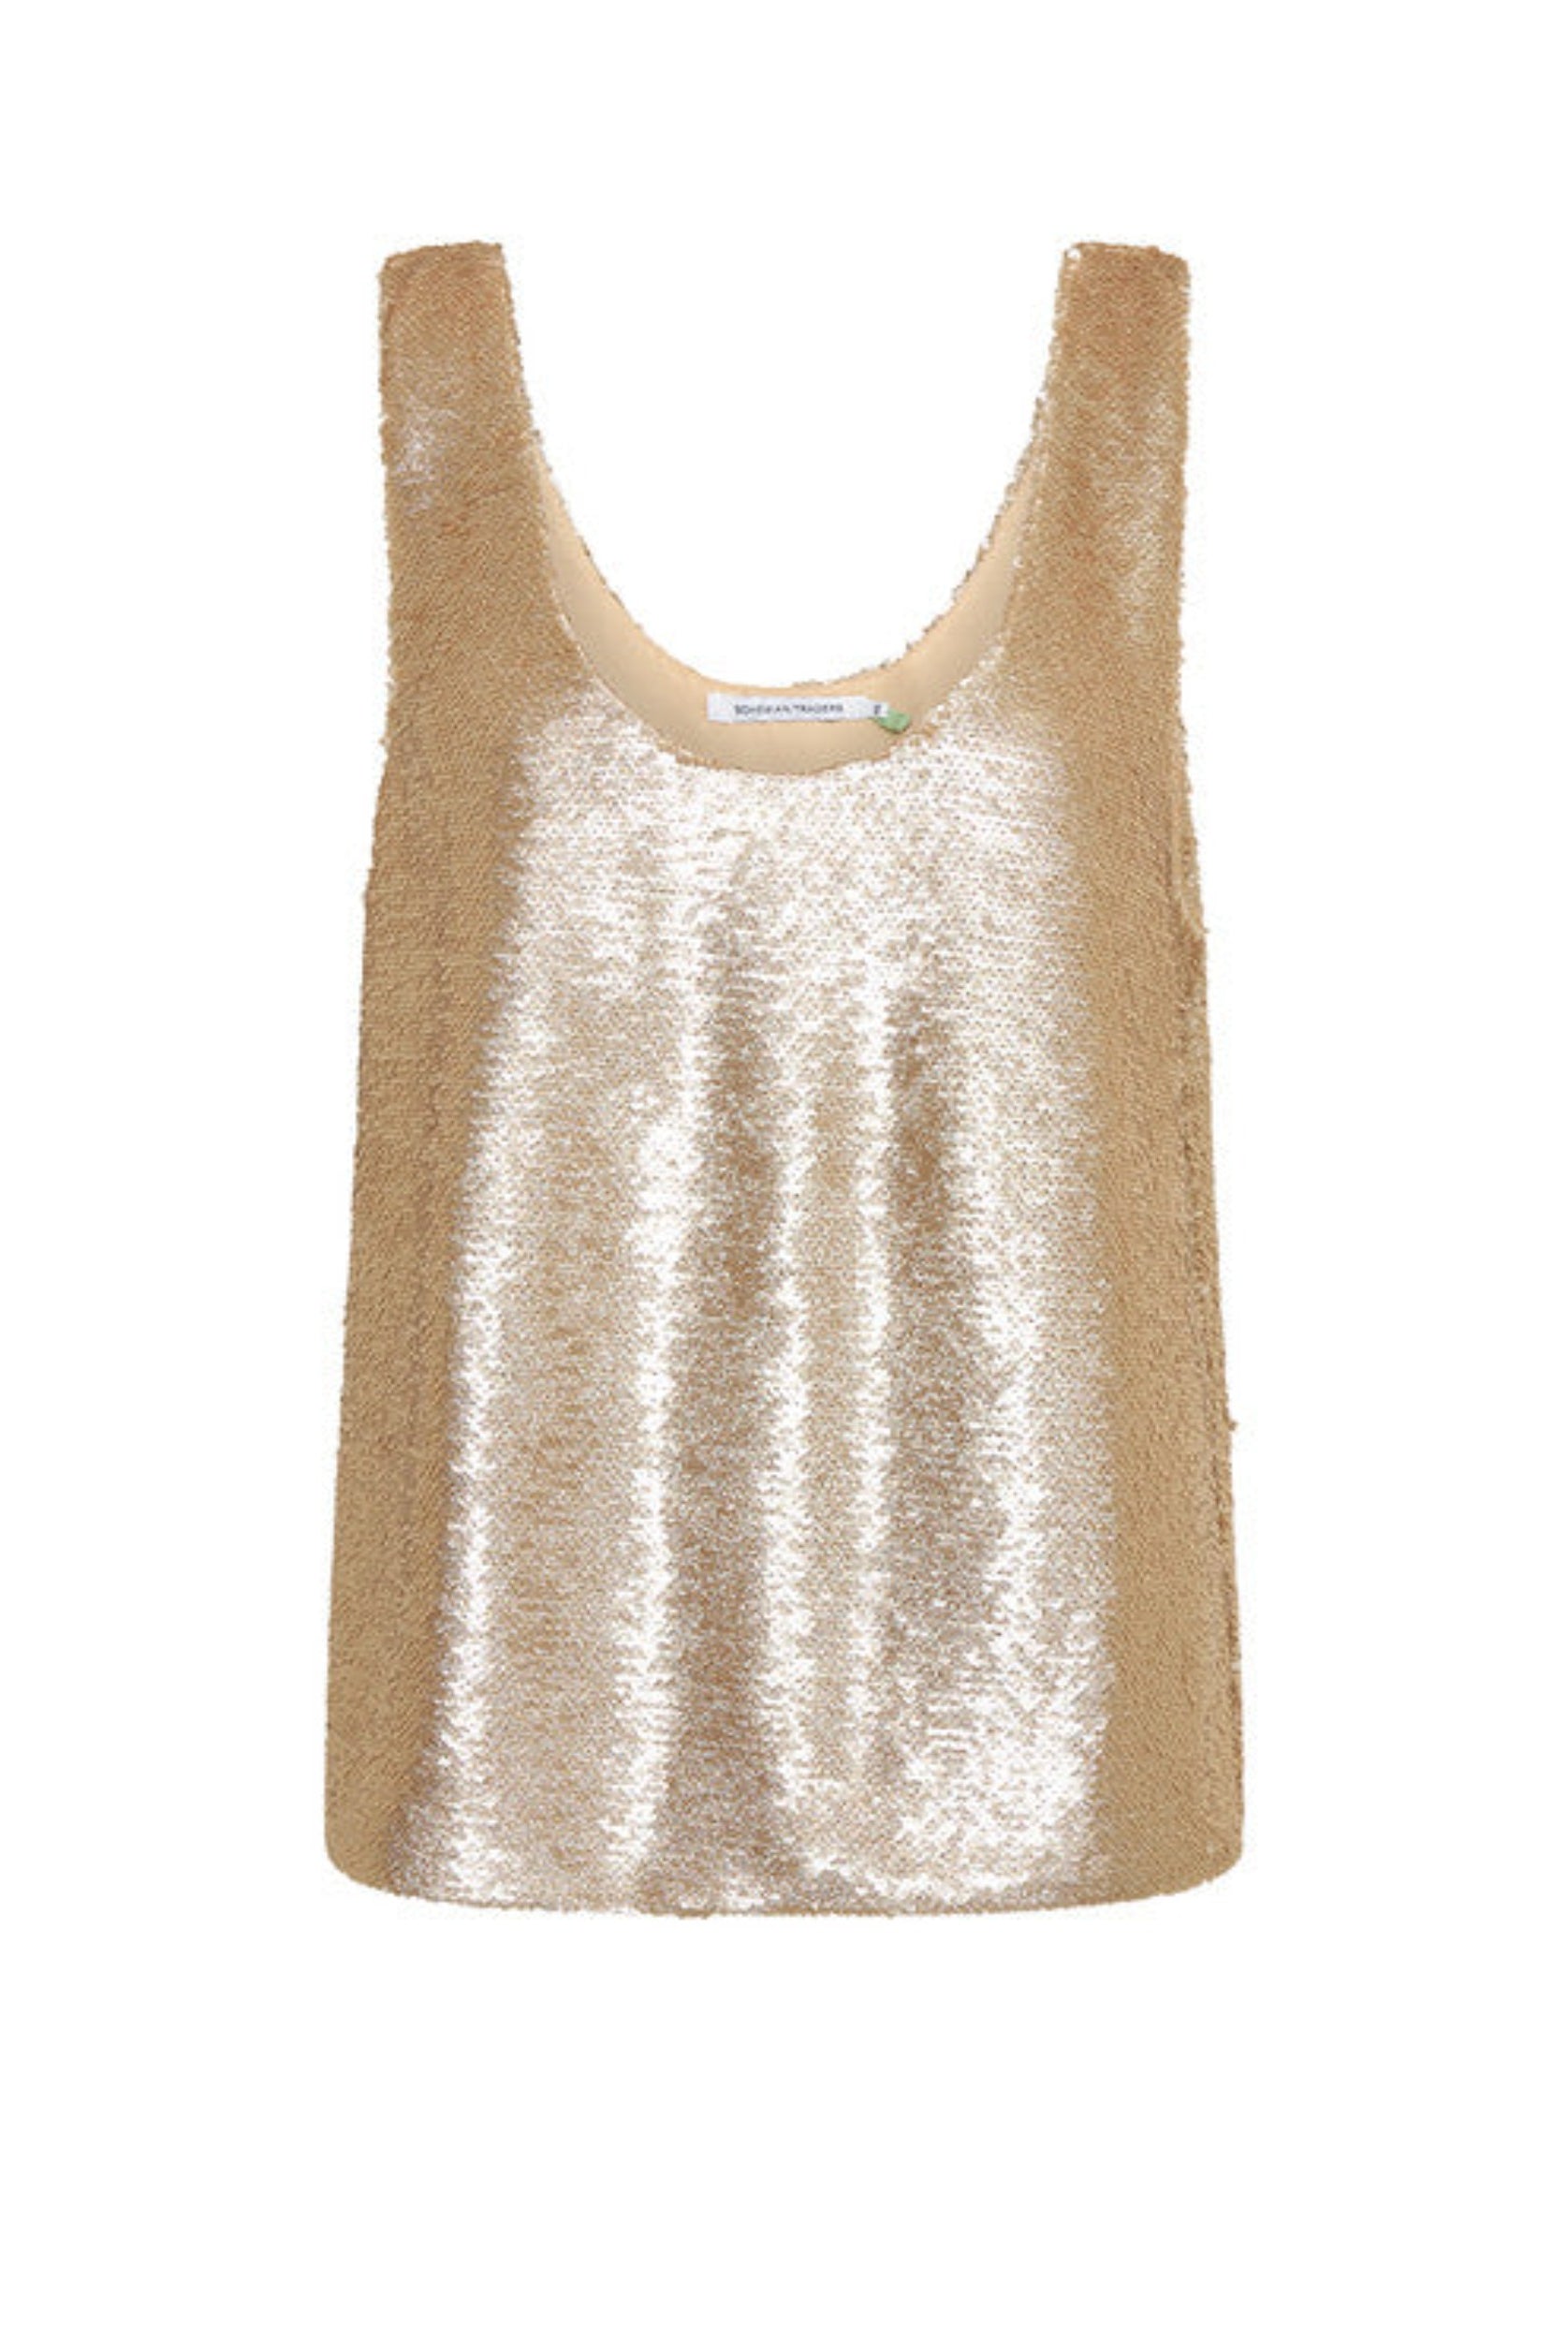 Gold sequin tank top from Bohemian Traders